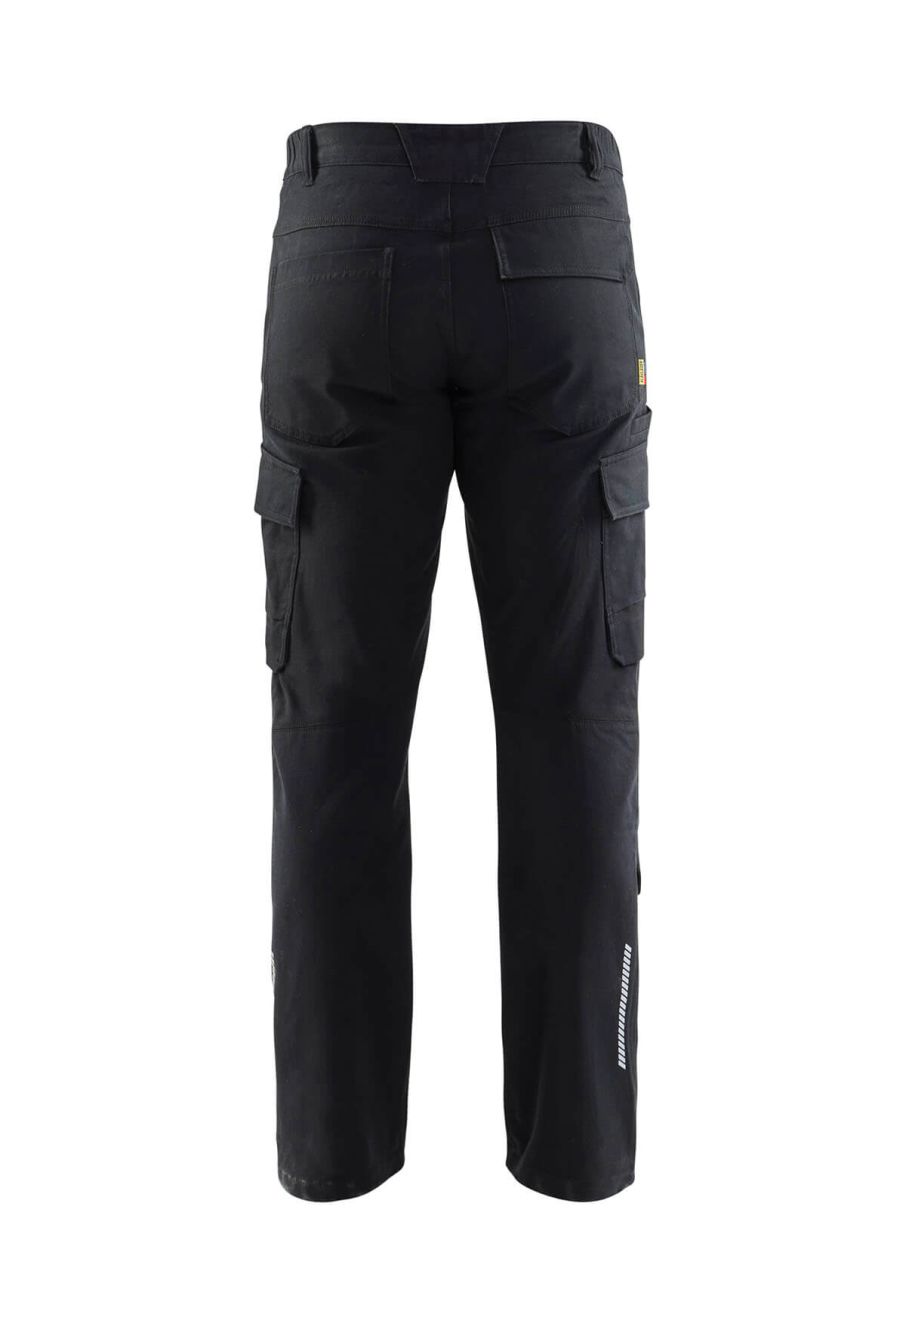 Blaklader 7106 Womens Stretch Trousers